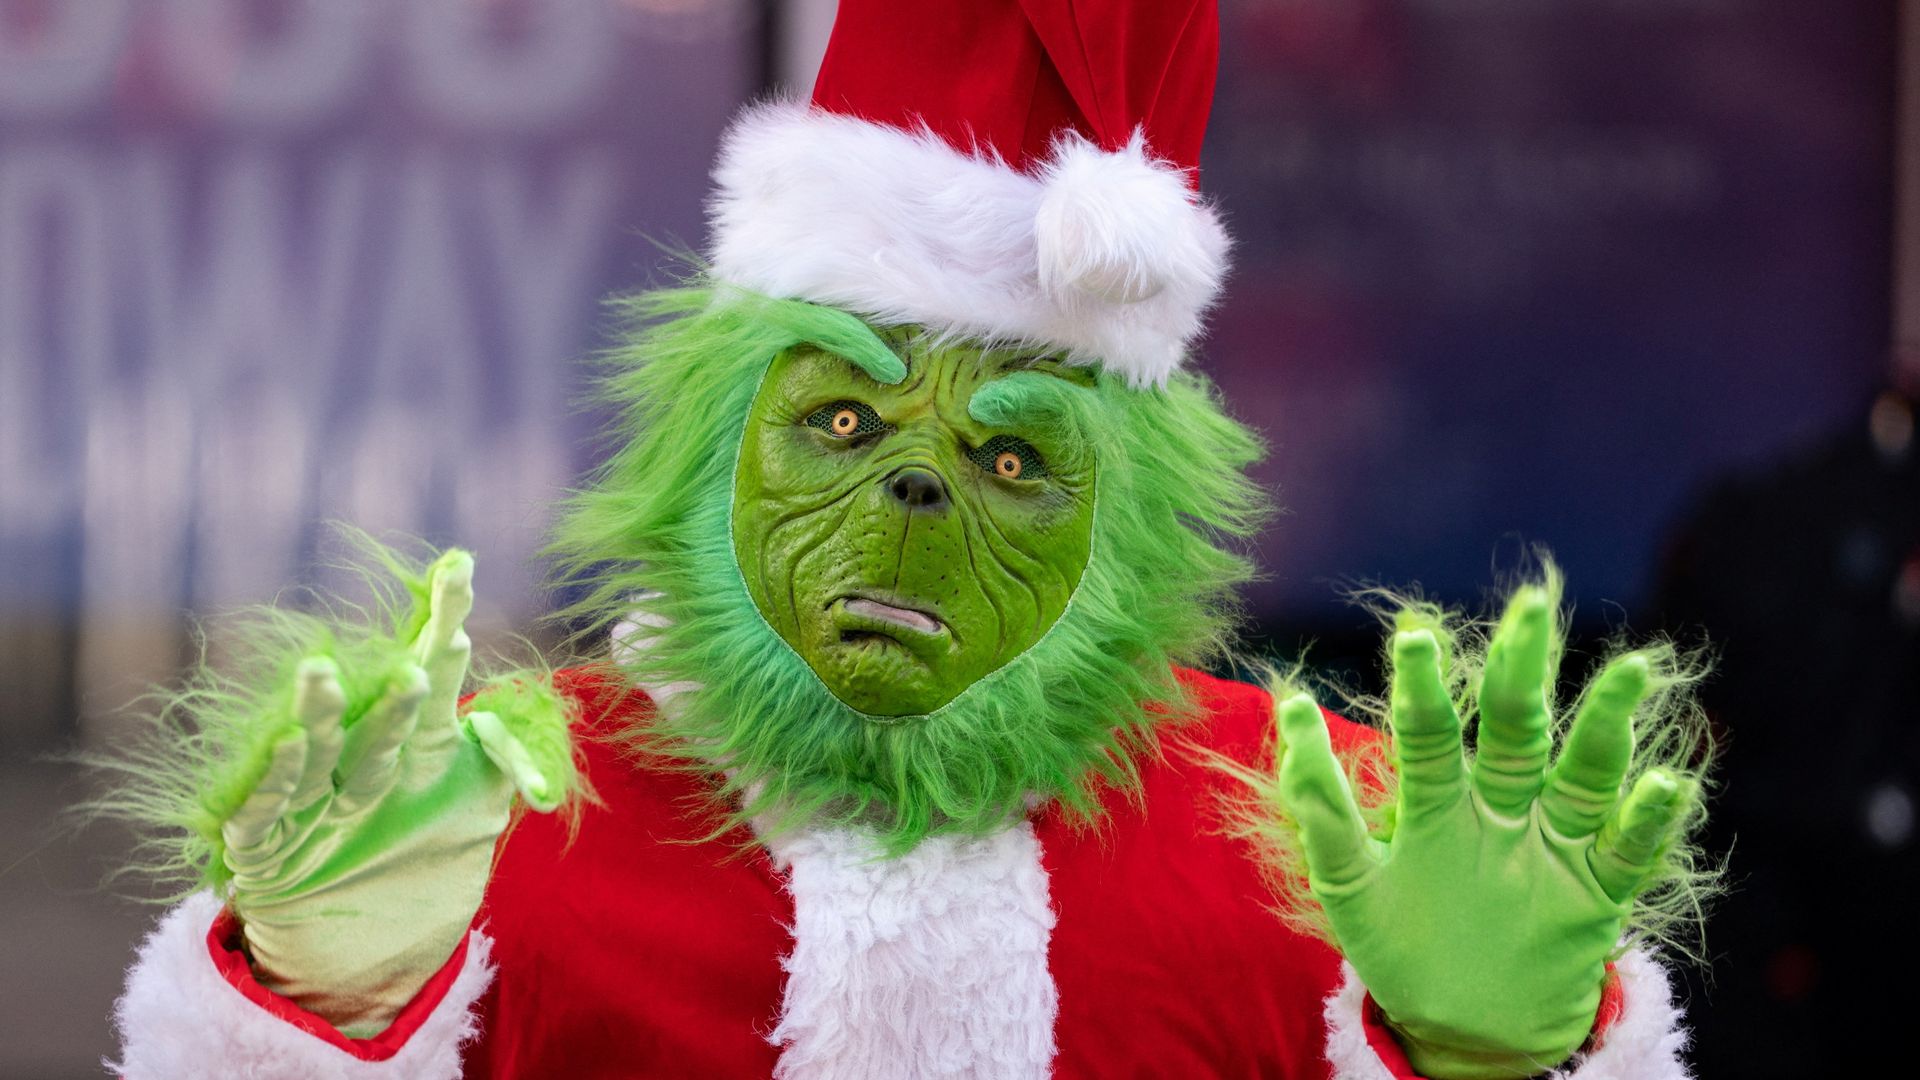 Teaching assistant loses religious discrimination claim over Christmas Grinch award